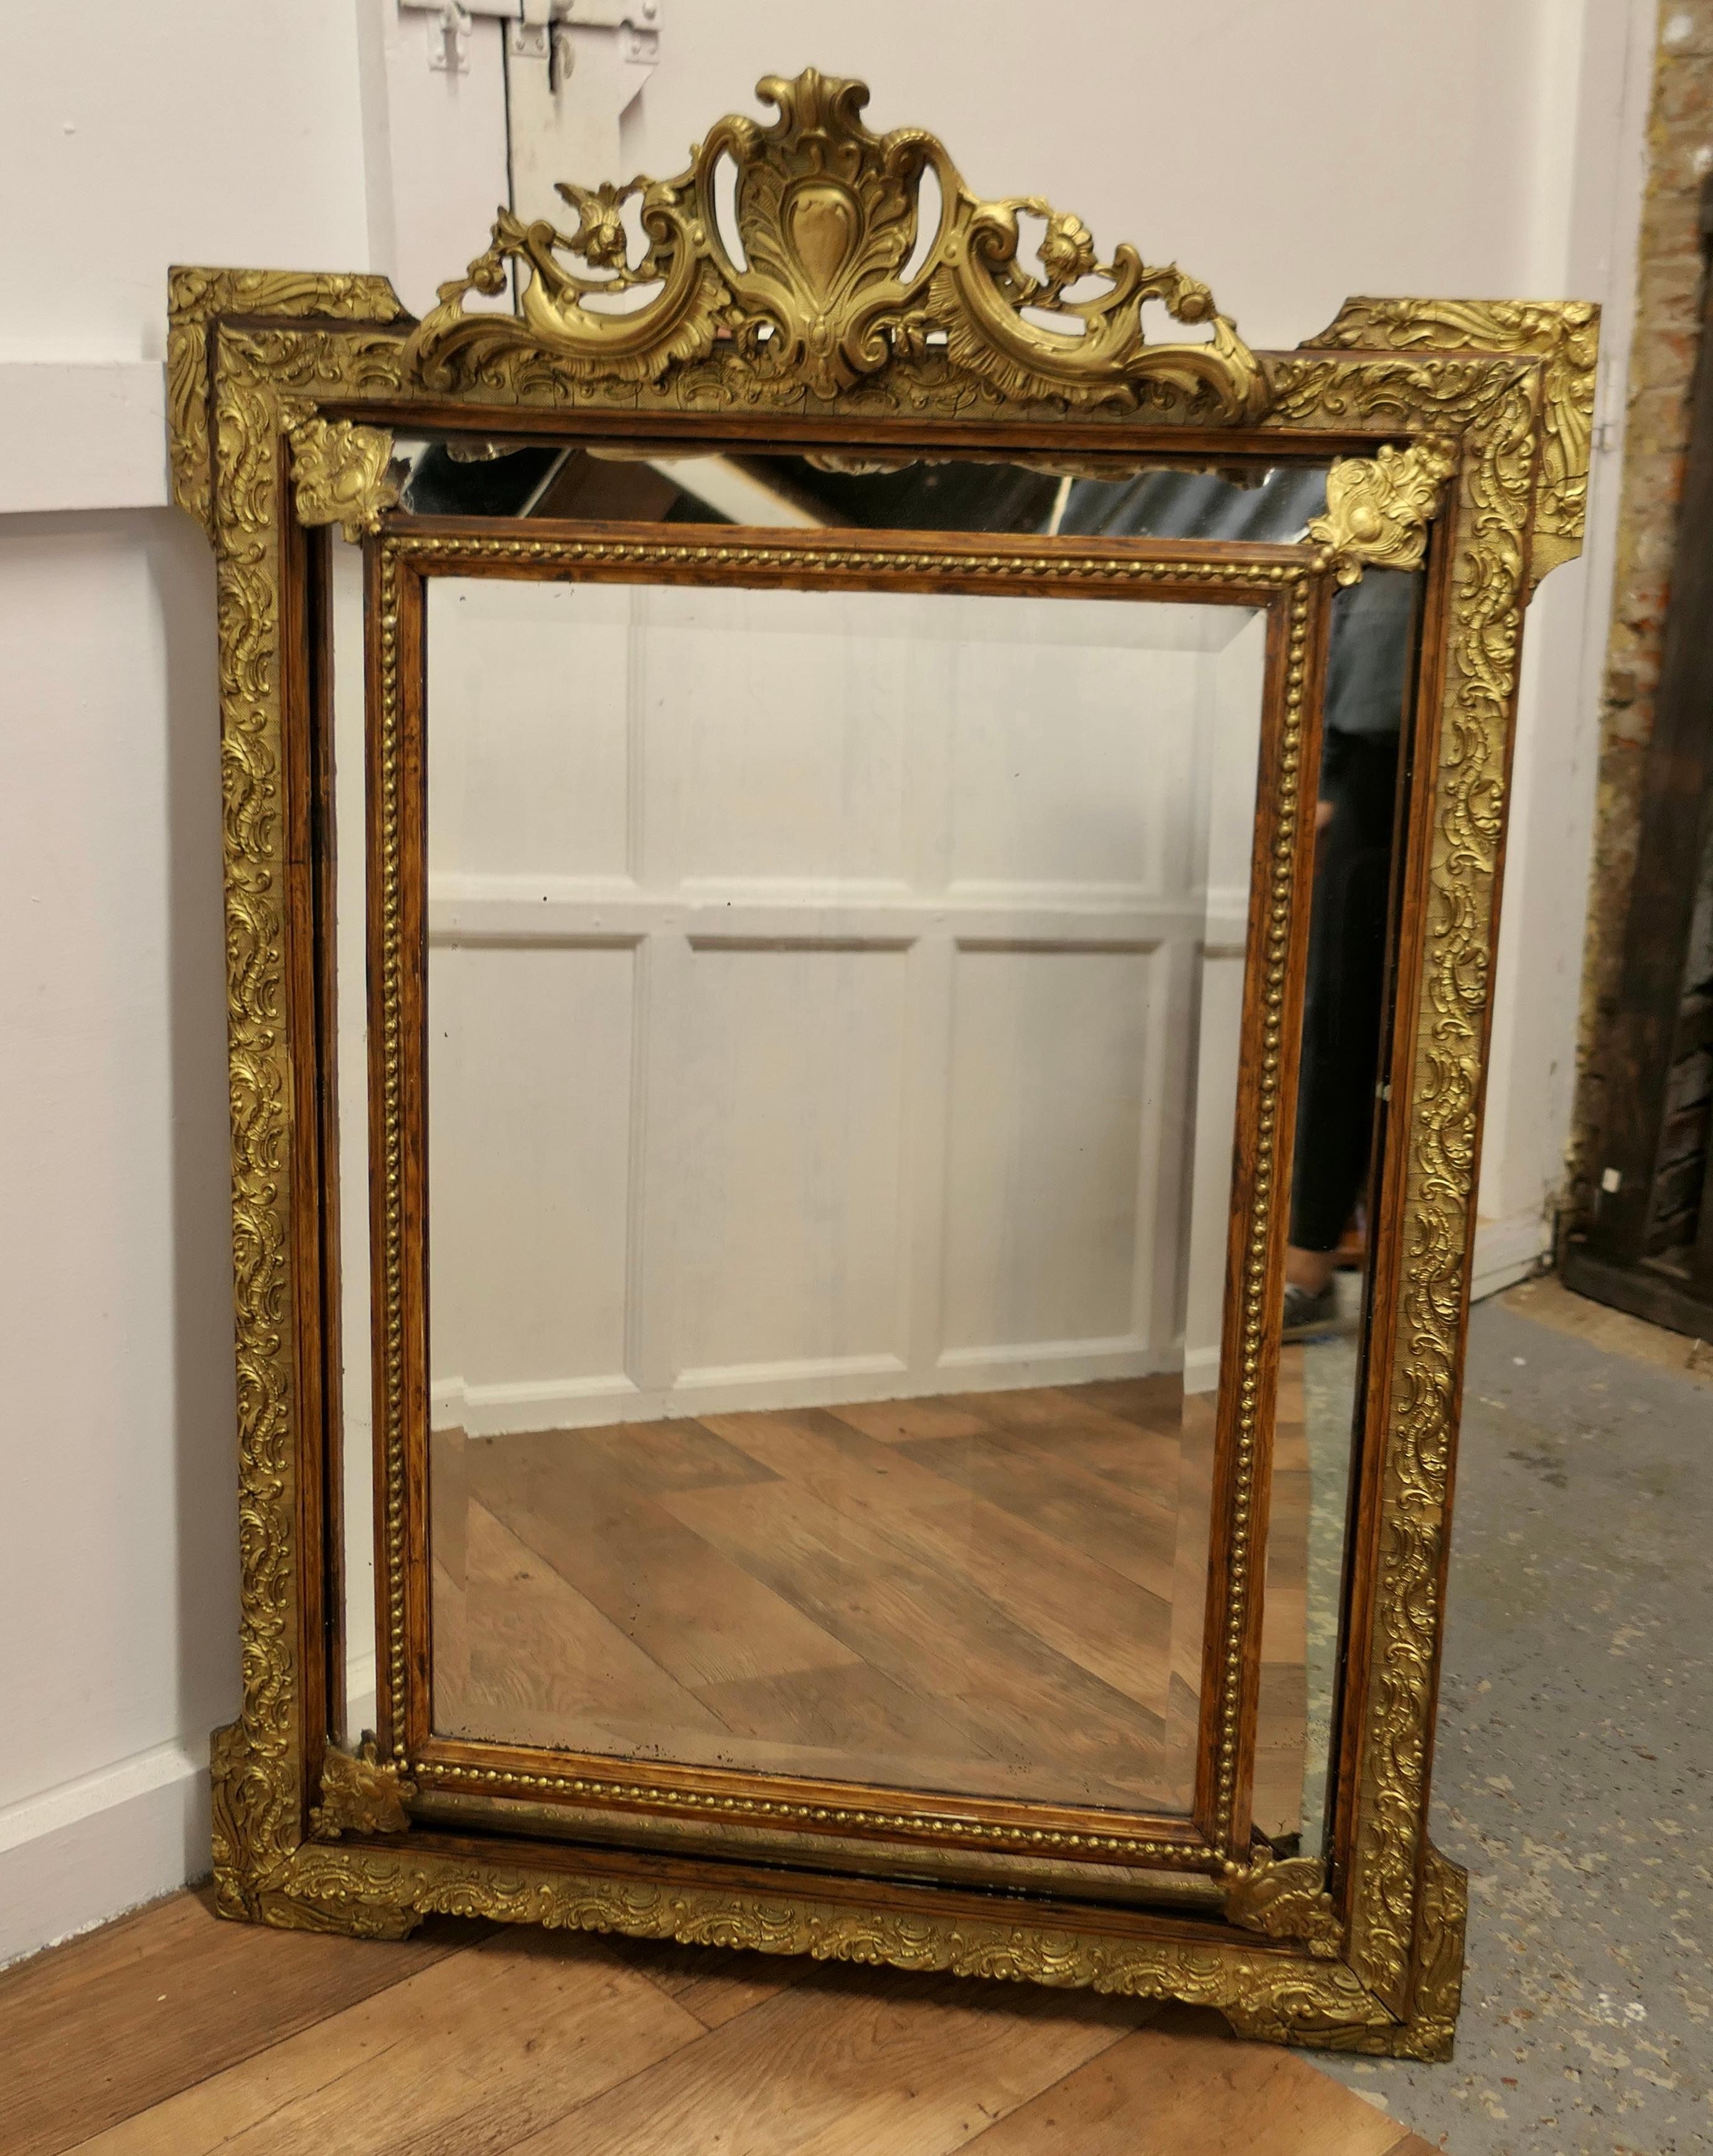 French Provincial A Stunning Napoleon III French Cushion Mirror  This is an exquisite piece a fine For Sale